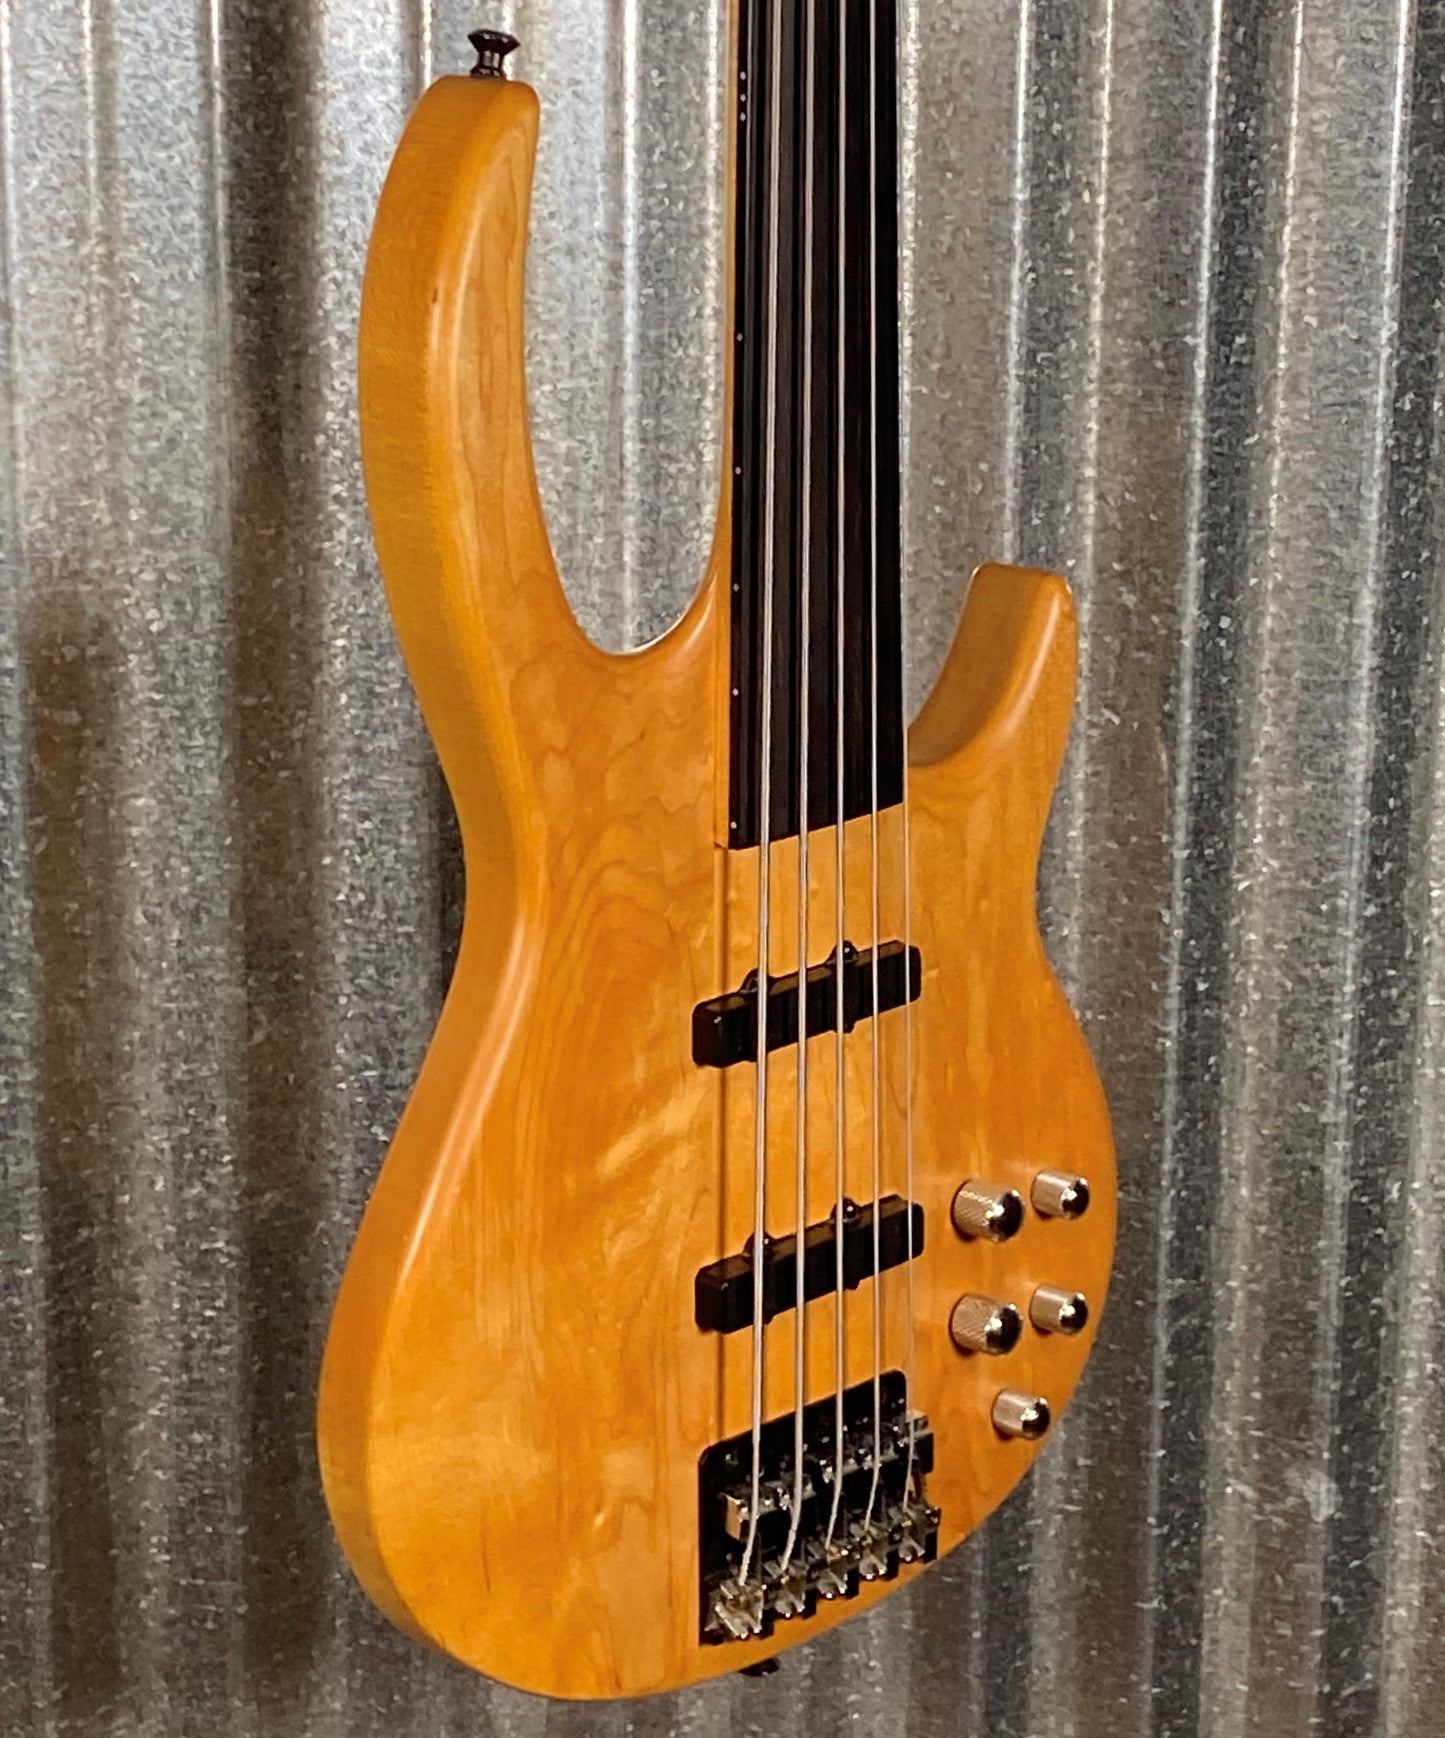 Carvin Bunny Brunel Fretless 5 String Bass & Case Used Non-Functional